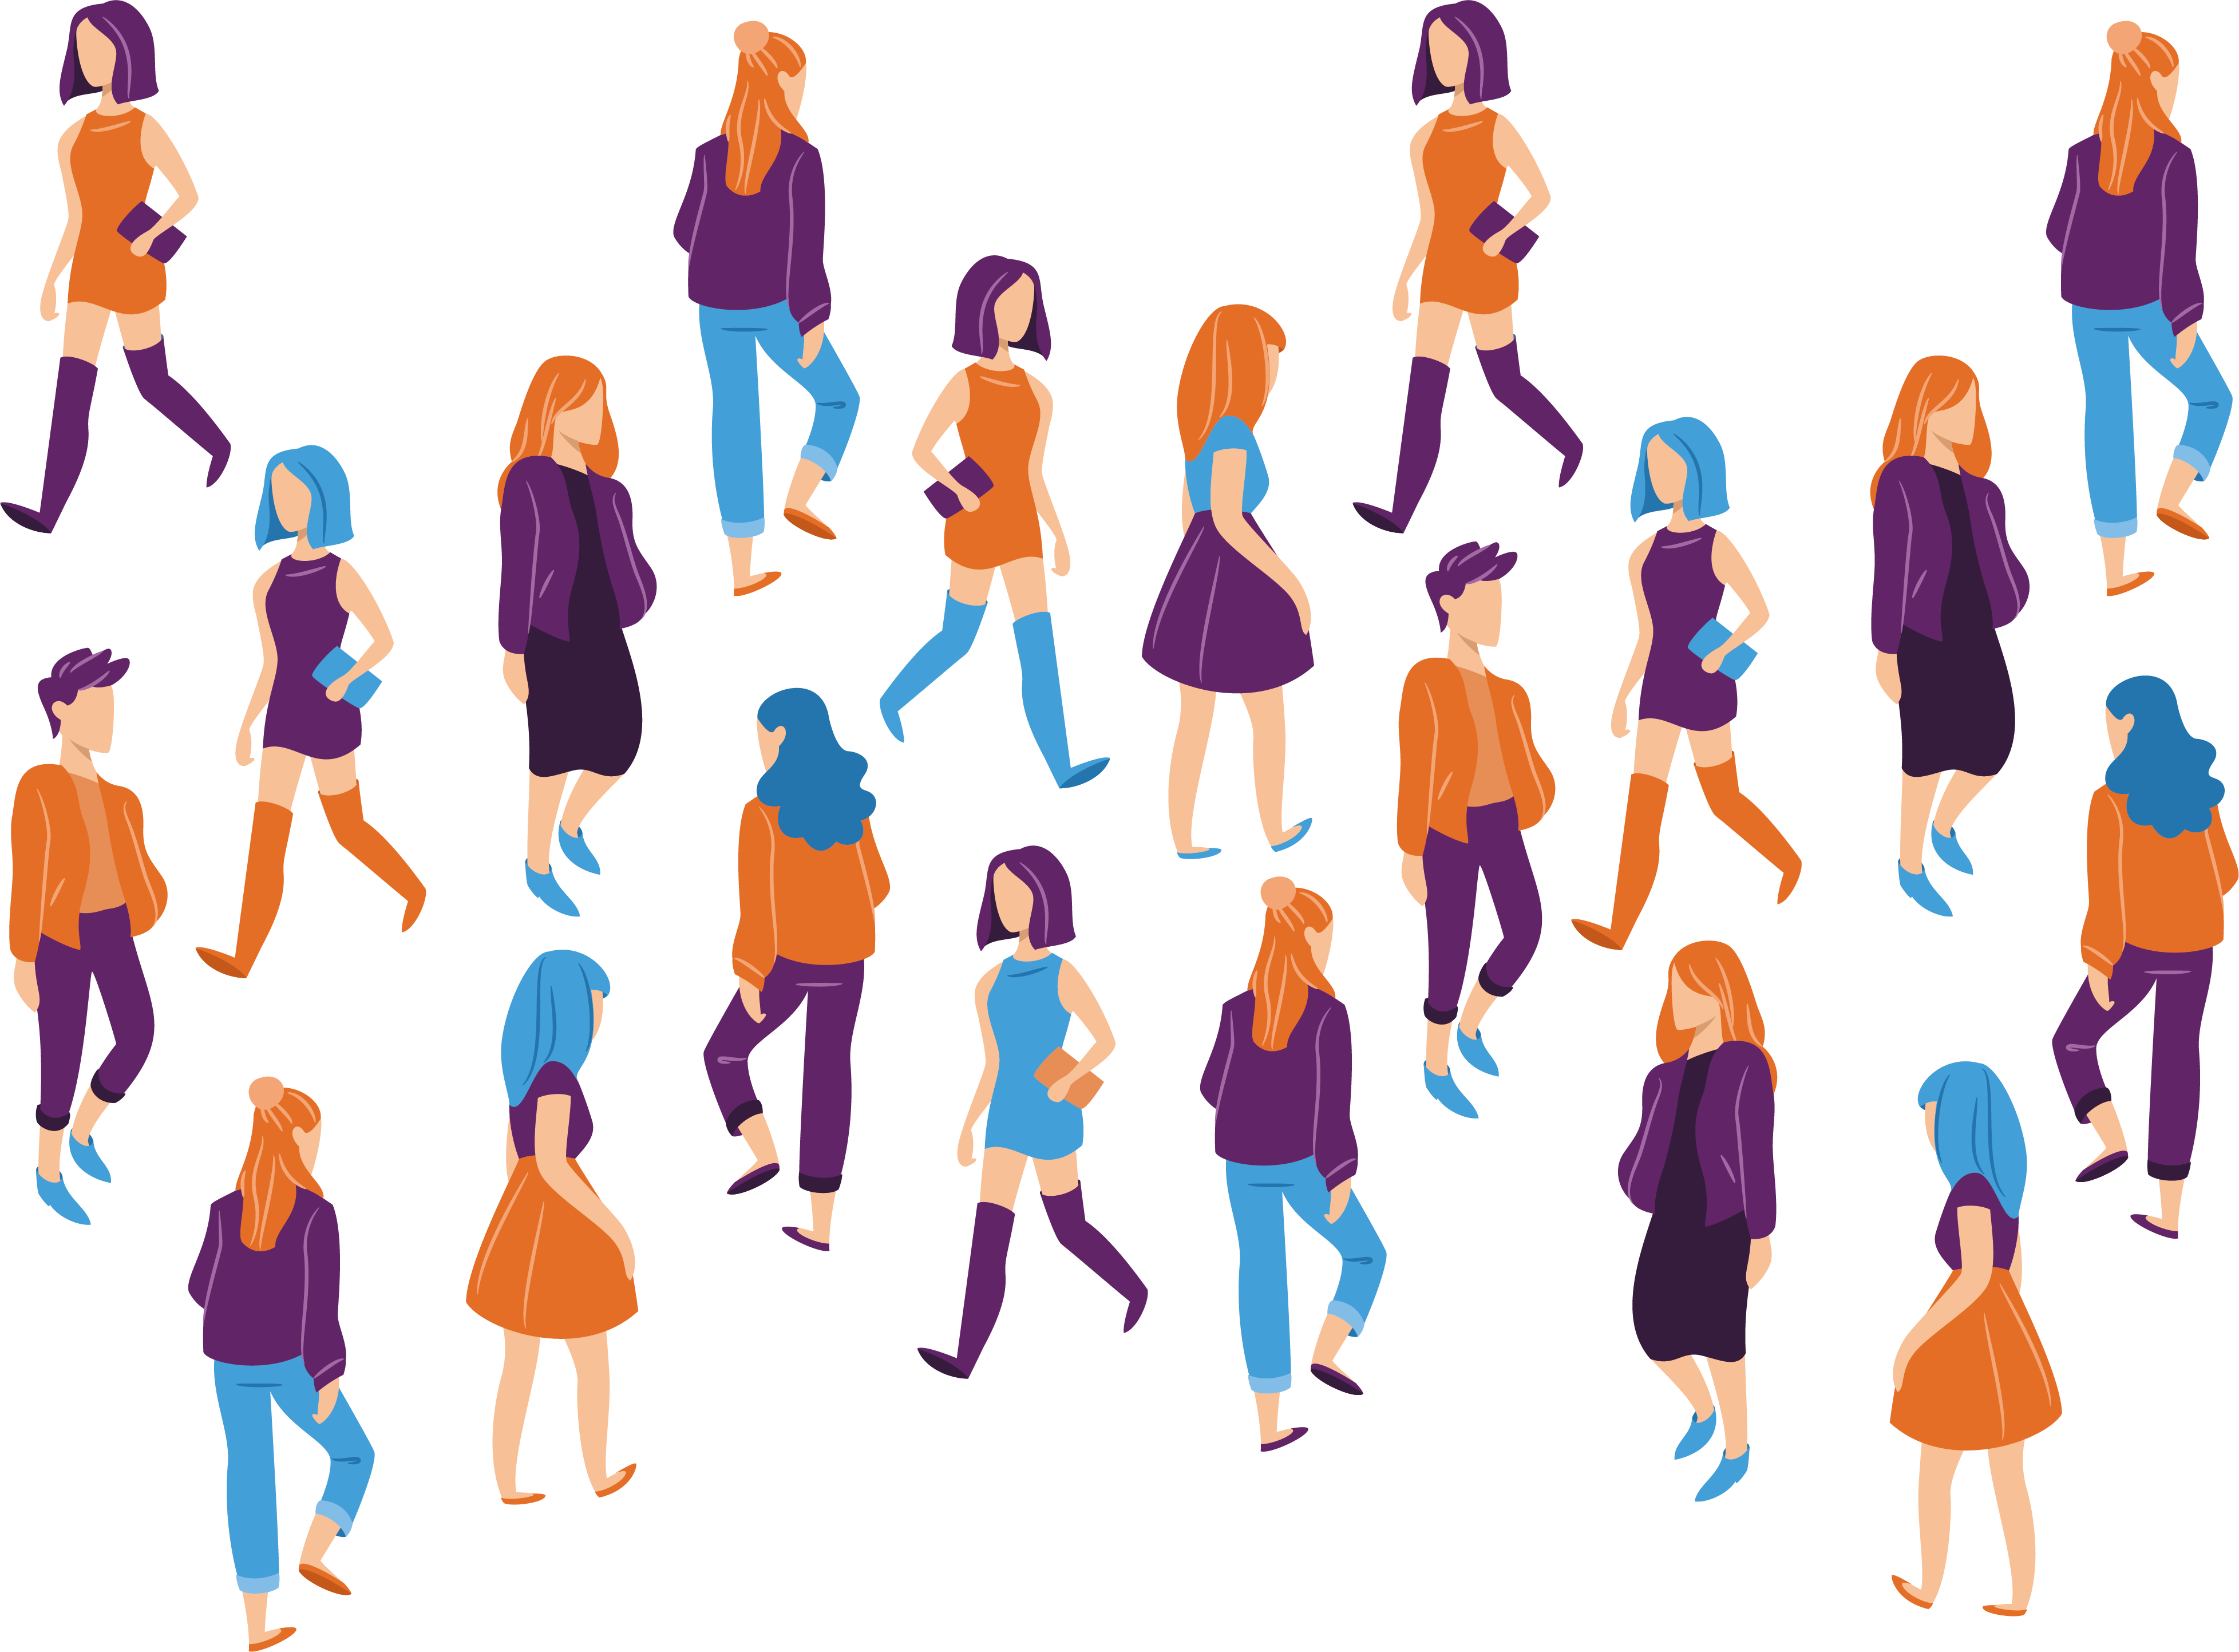 Crowd clipart crowded person, Crowd crowded person Transparent FREE for